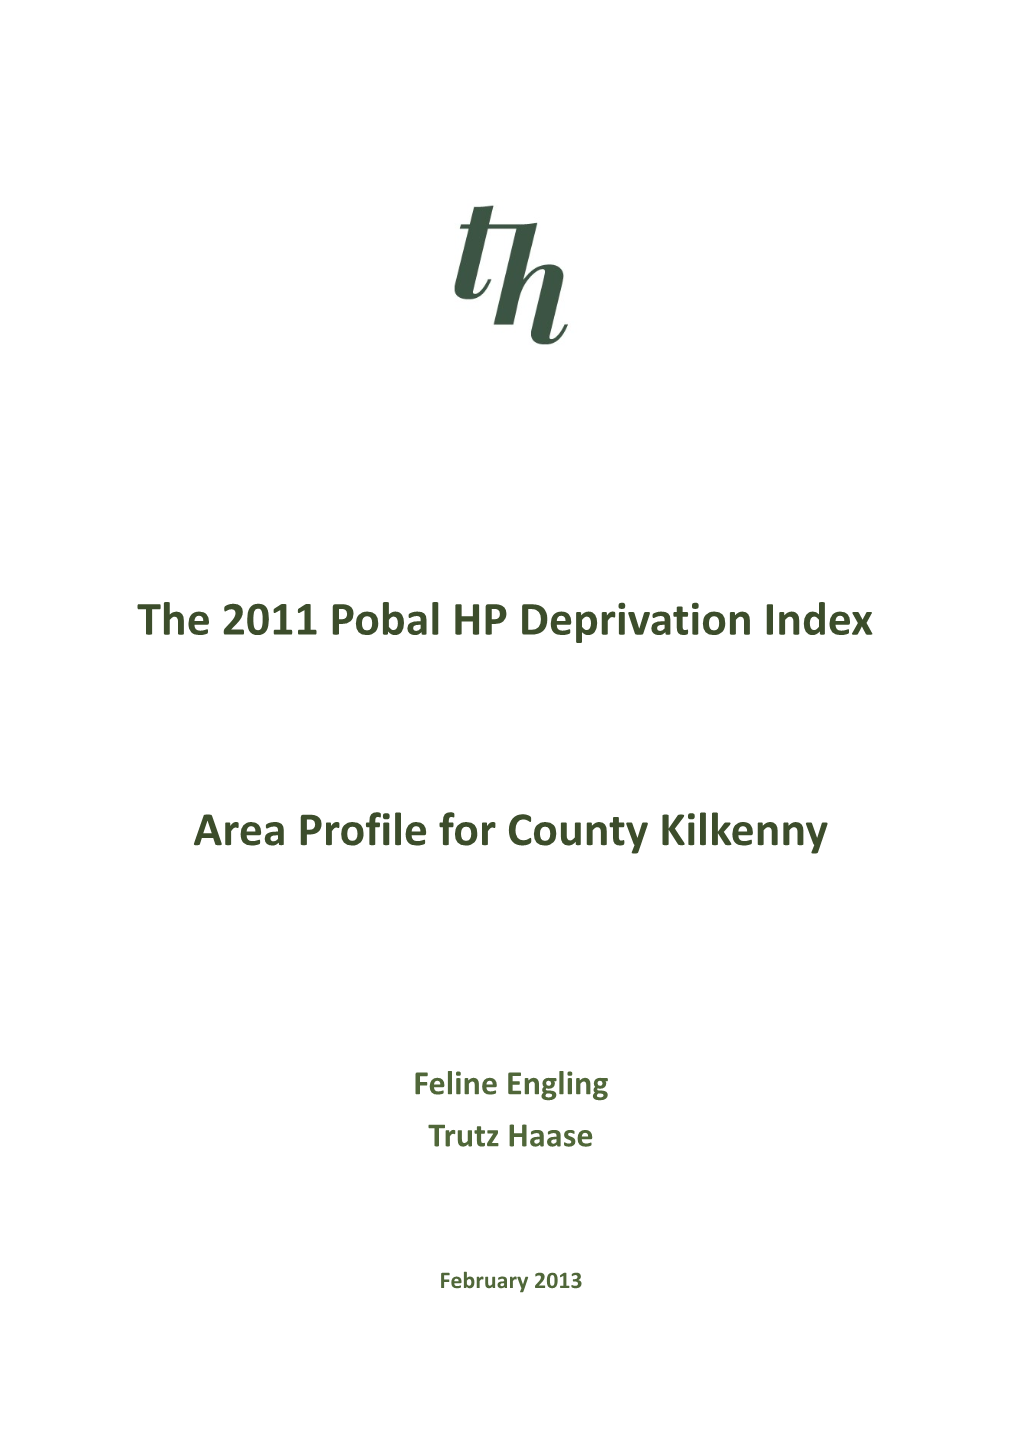 The 2011 Pobal HP Deprivation Index s1